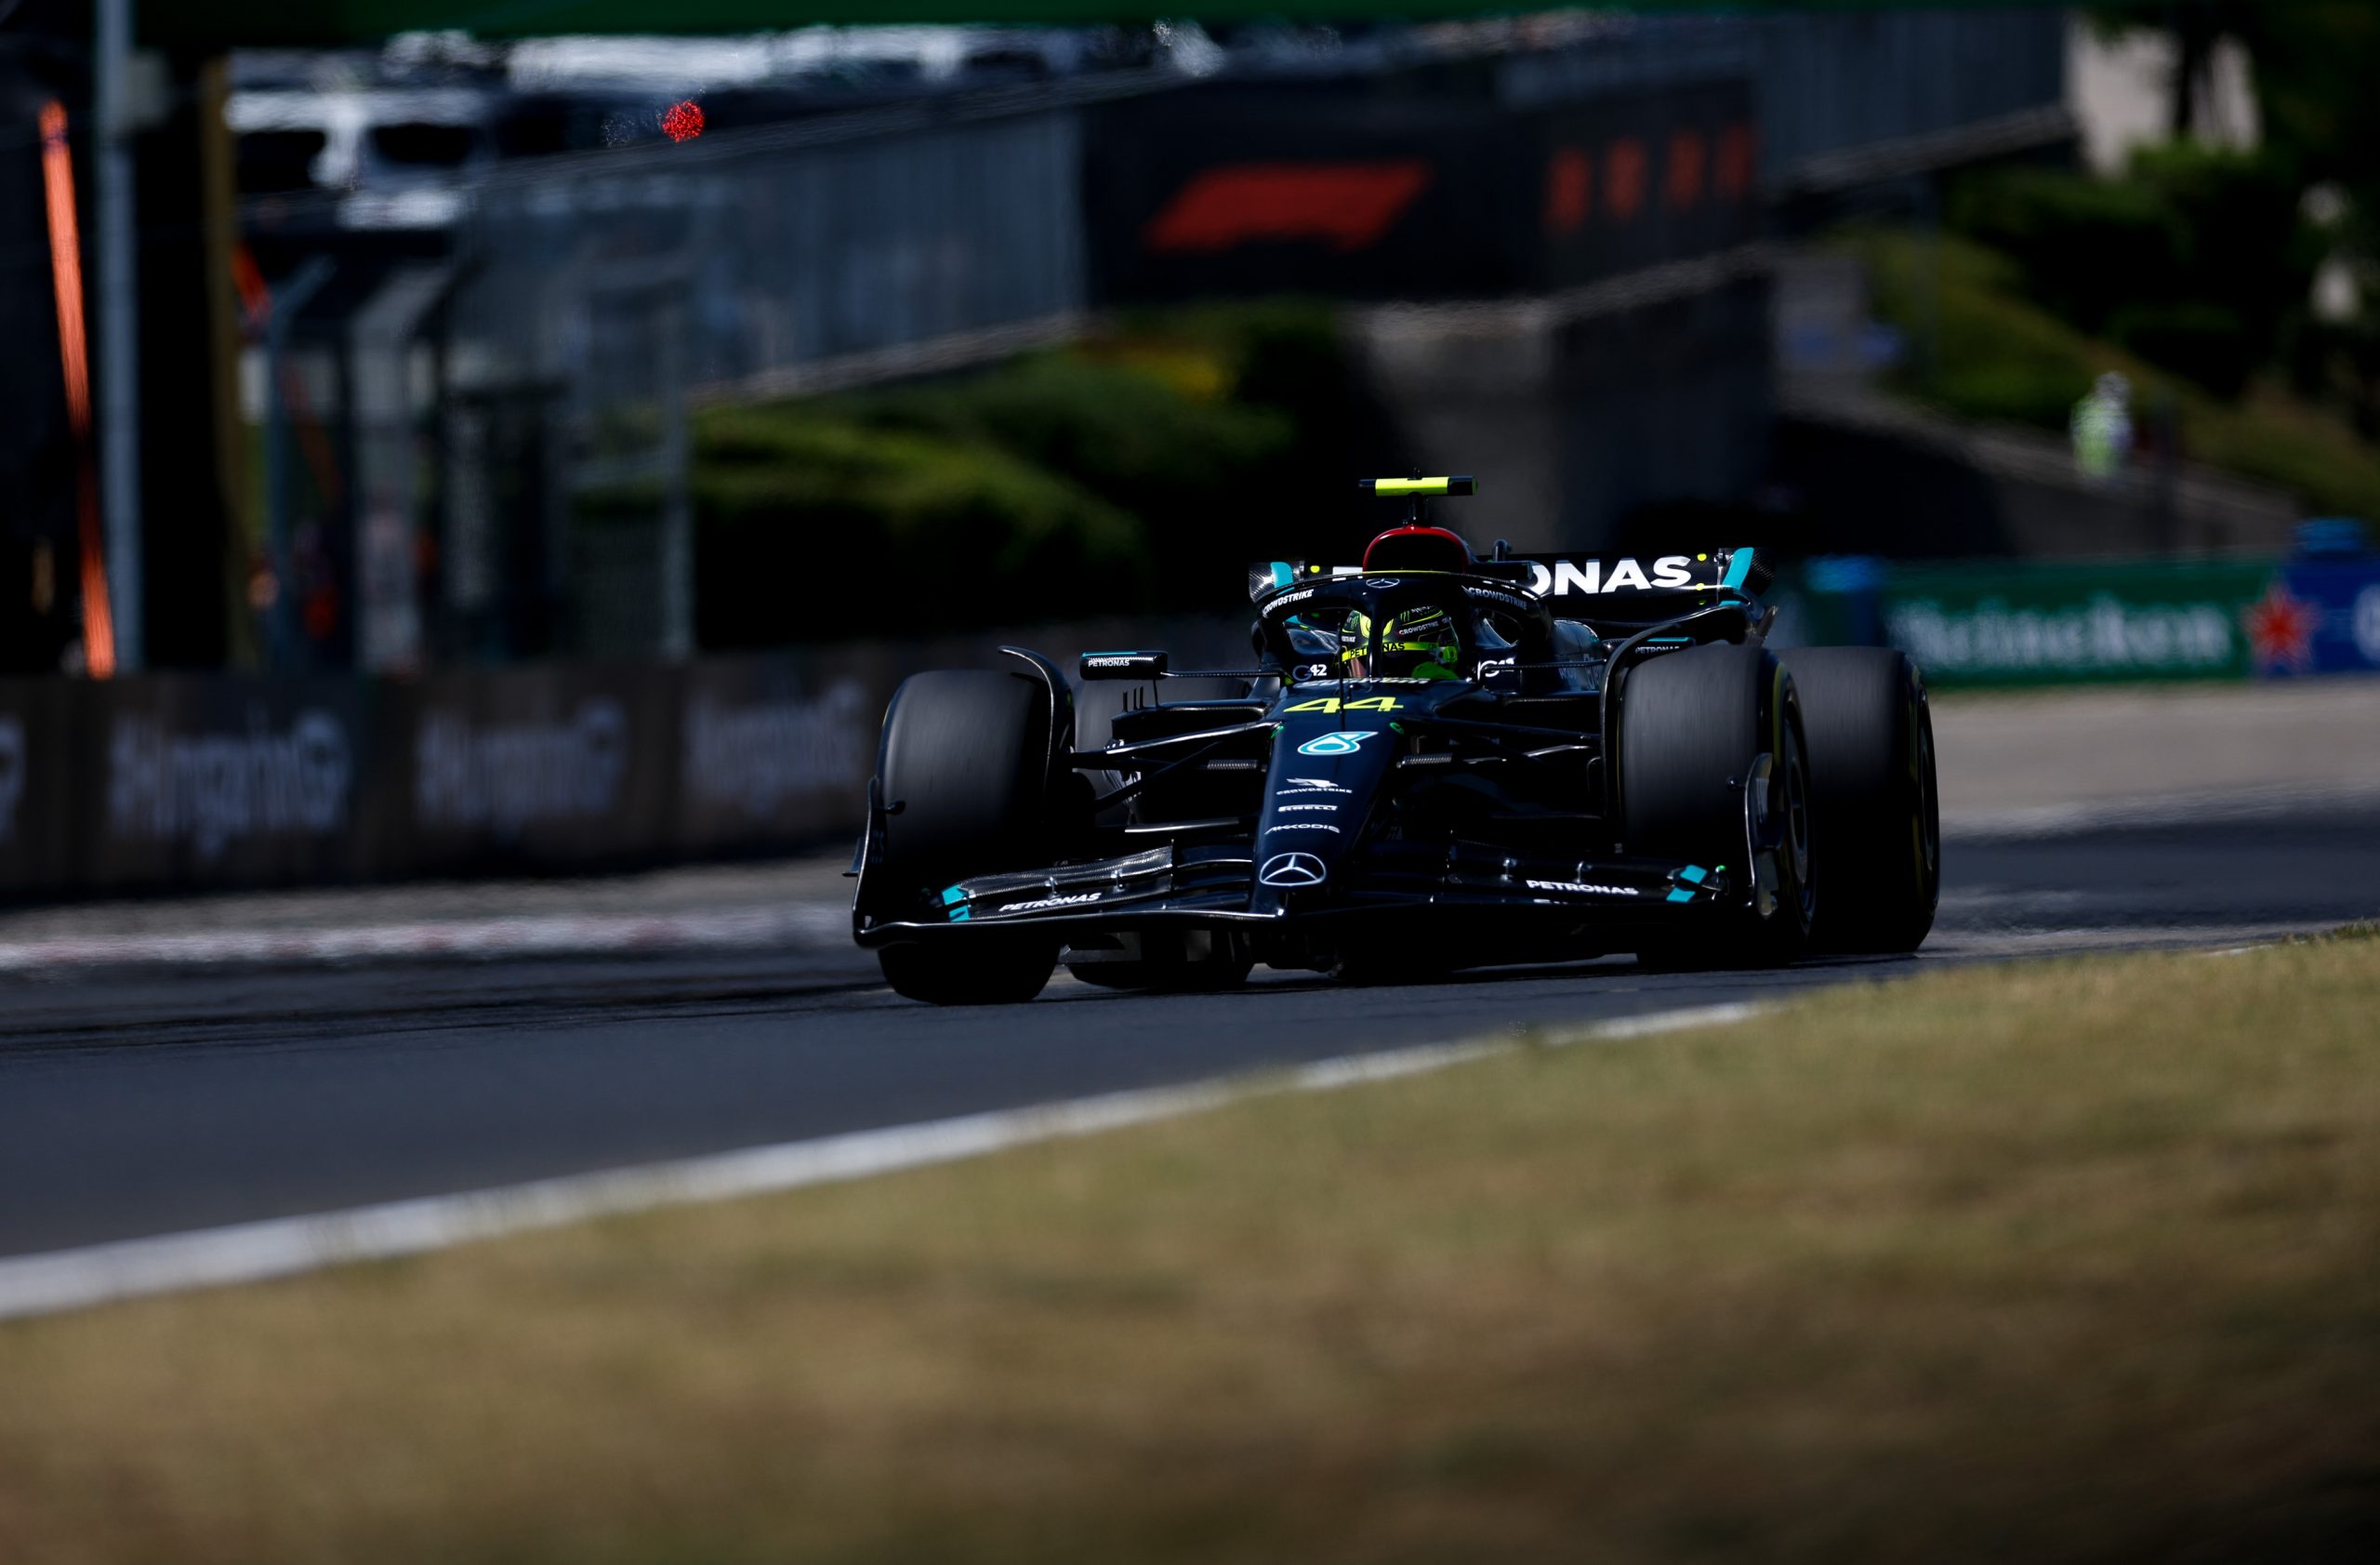 Lewis Hamilton (44) in his Mercedes on track at the Hungaroring during the Saturday track sessions for the Hungarian Grand Prix.